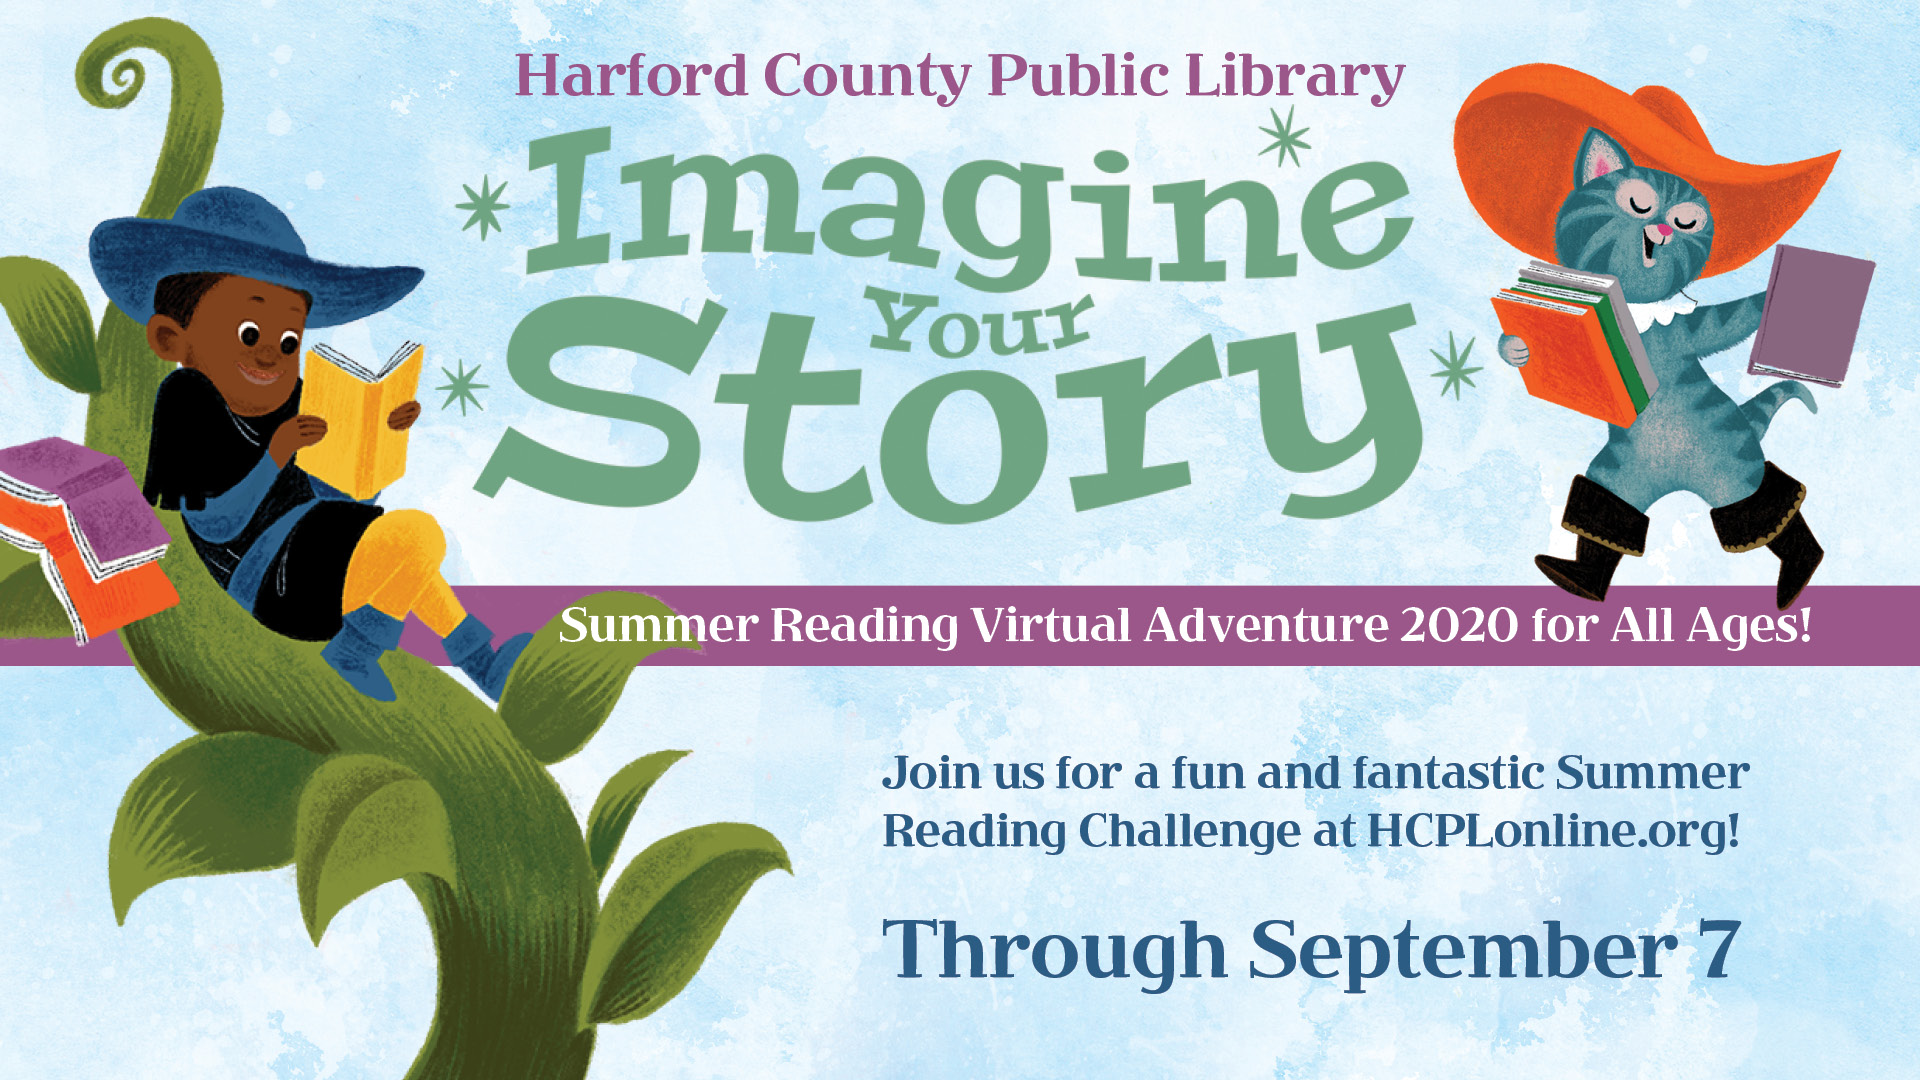 Harford County Public Library Launches Summer Reading Virtual Adventure